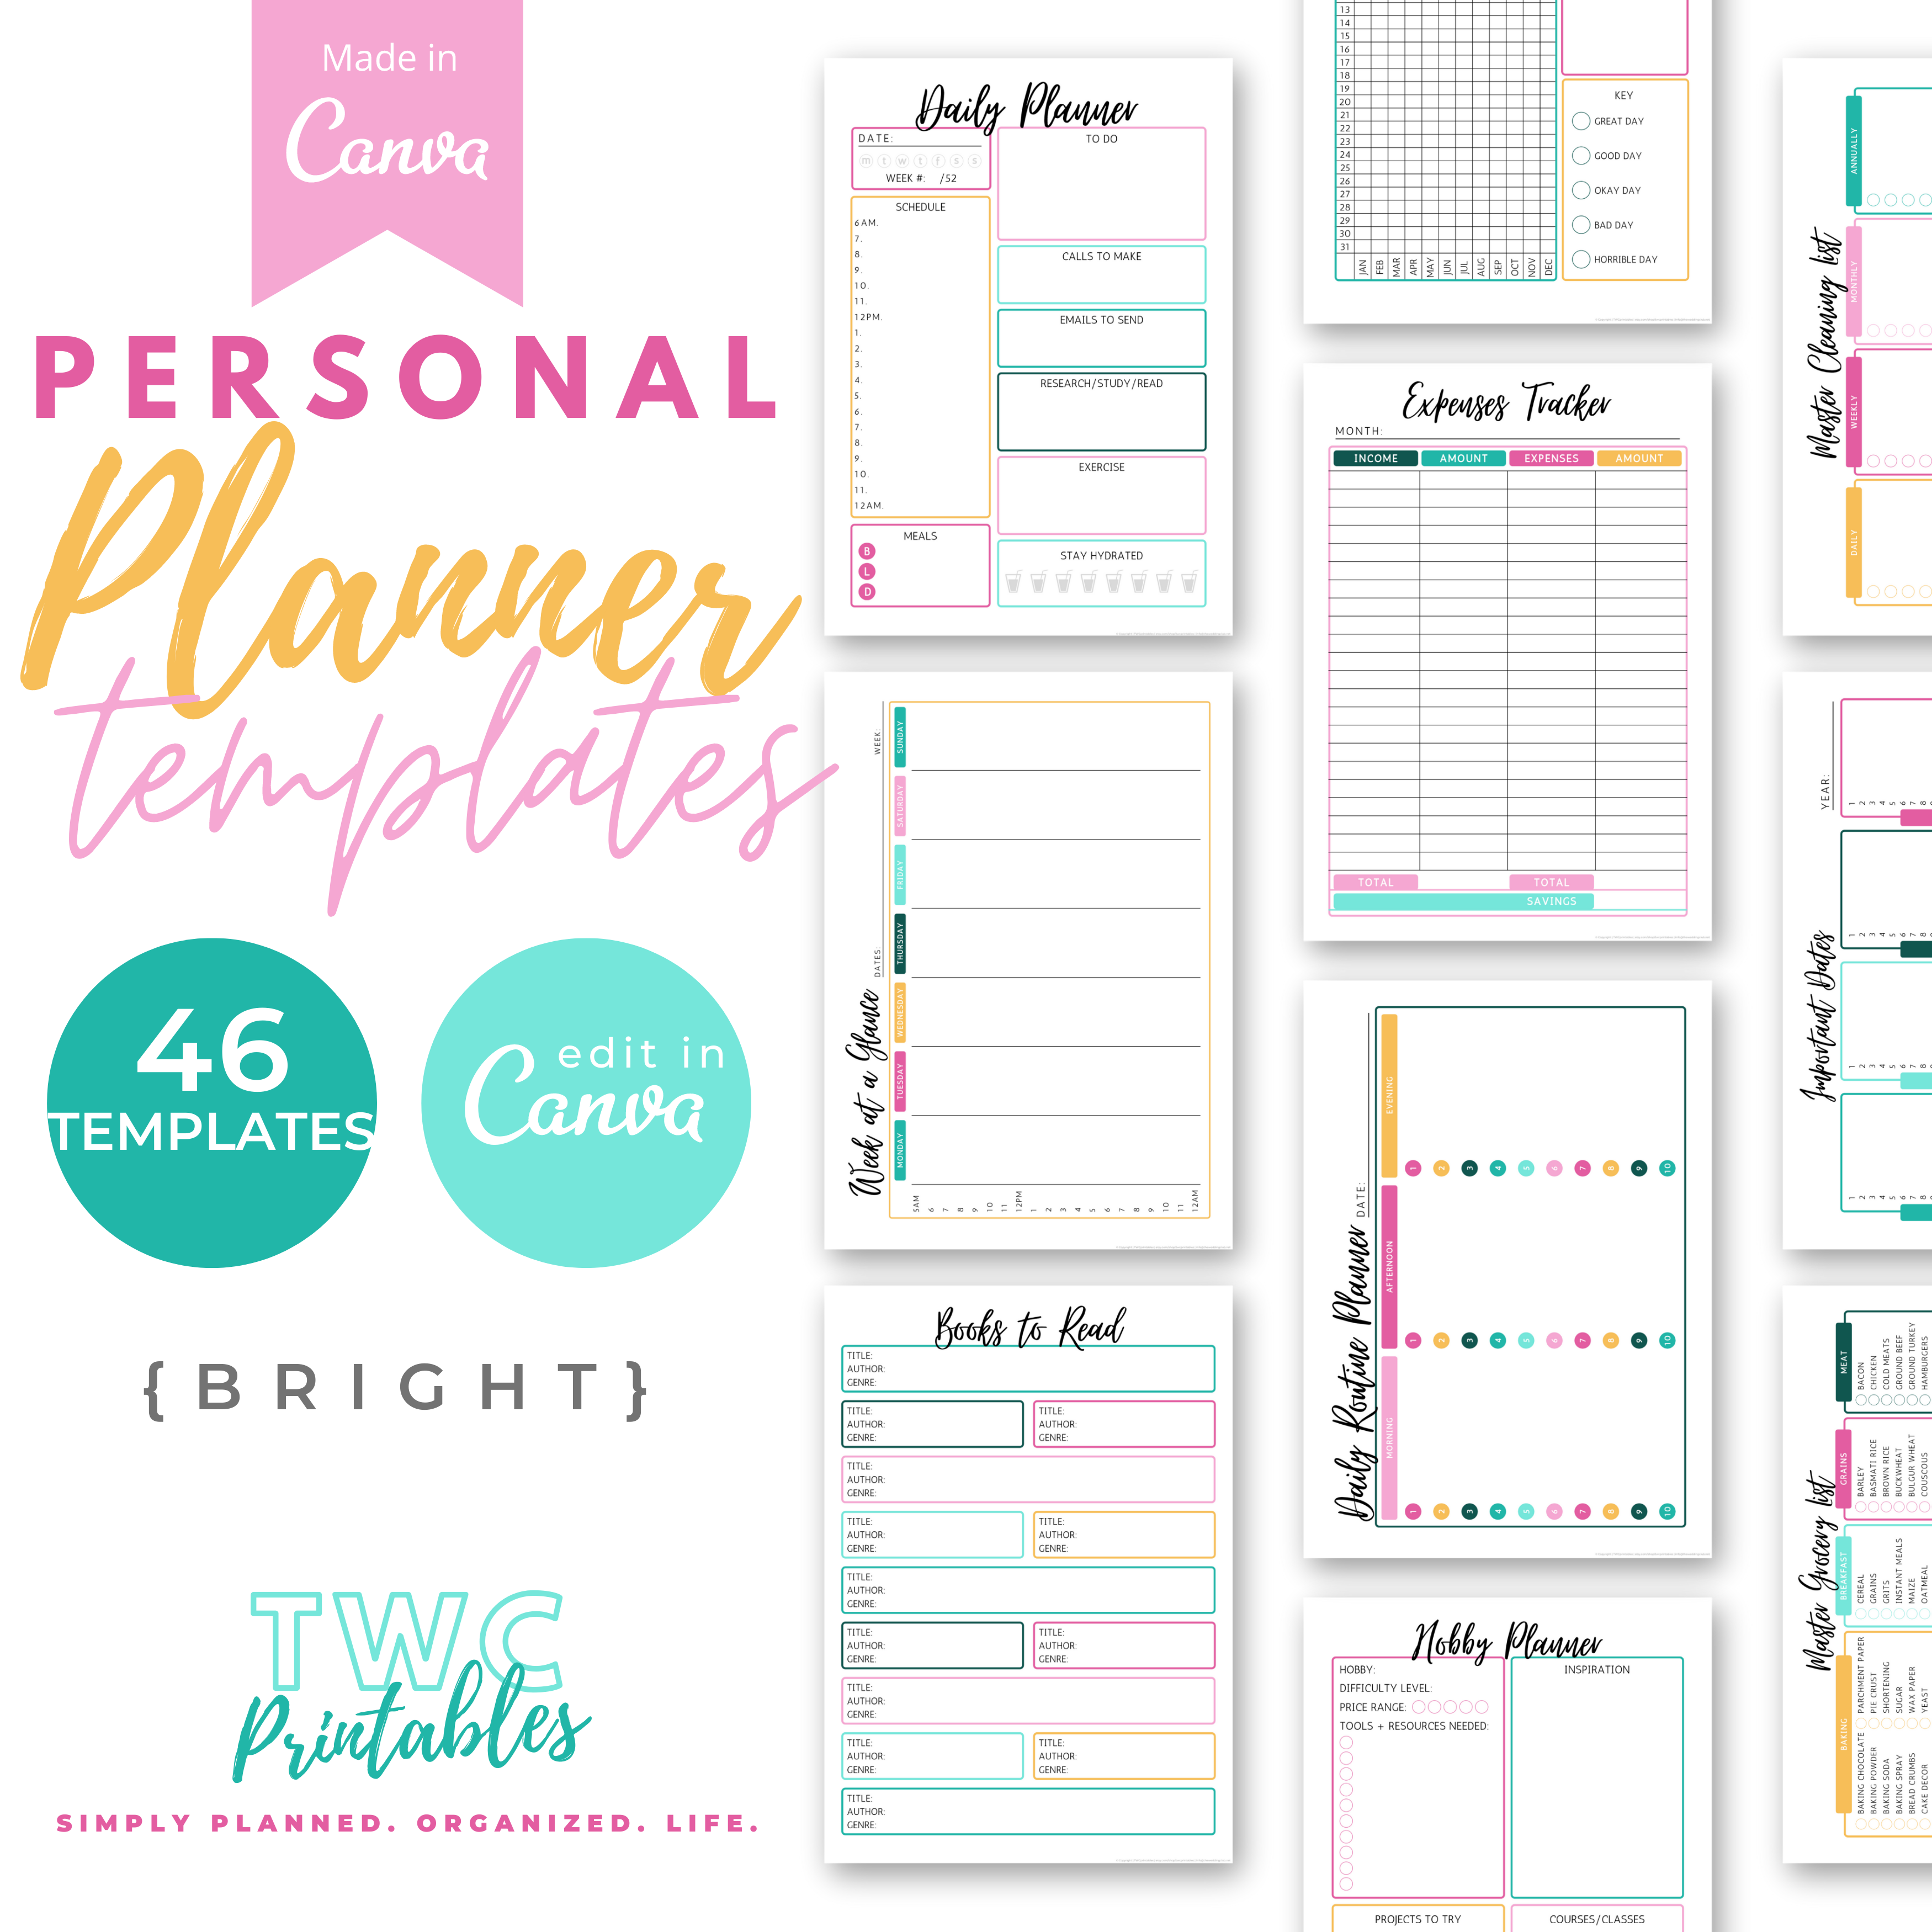 Plan your life with these handy editable personal planner templates for Canva! These sheets will help you to keep track of your favorites, finances, hobbies, meal planning and so much more! You can change everything from colors to fonts, text, elements, etc. all you need is a free Canva account.